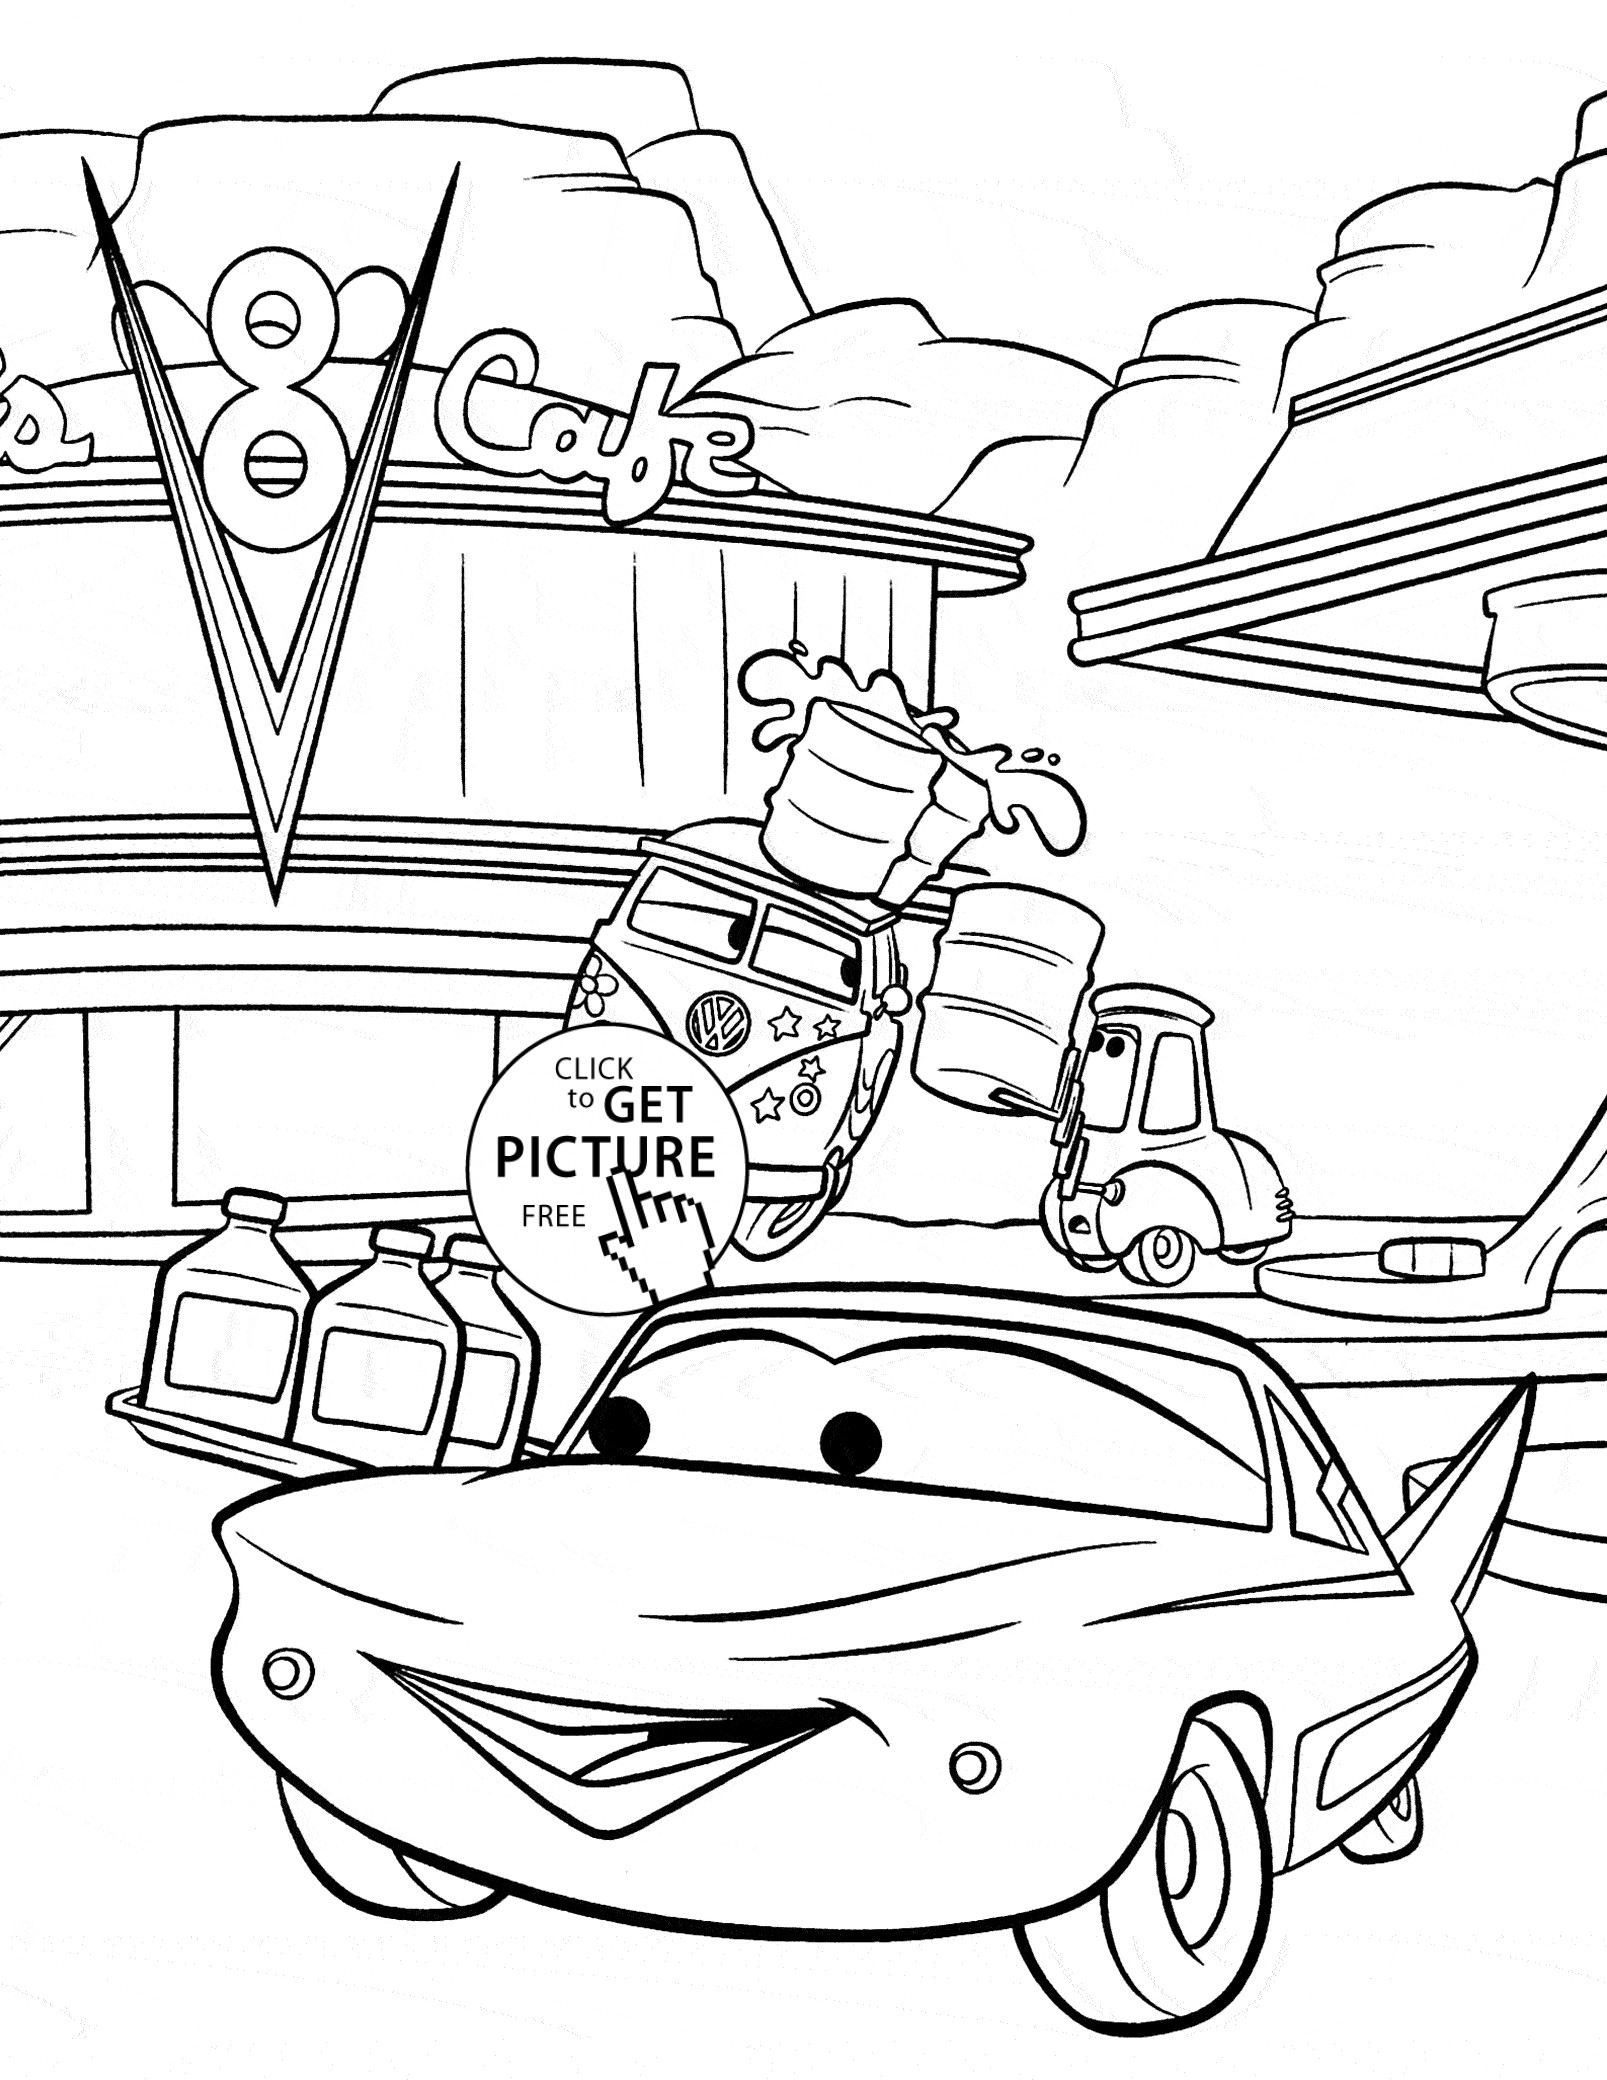 Boys Disney Coloring Pages
 Cars cafe 8 coloring page for kids disney coloring pages